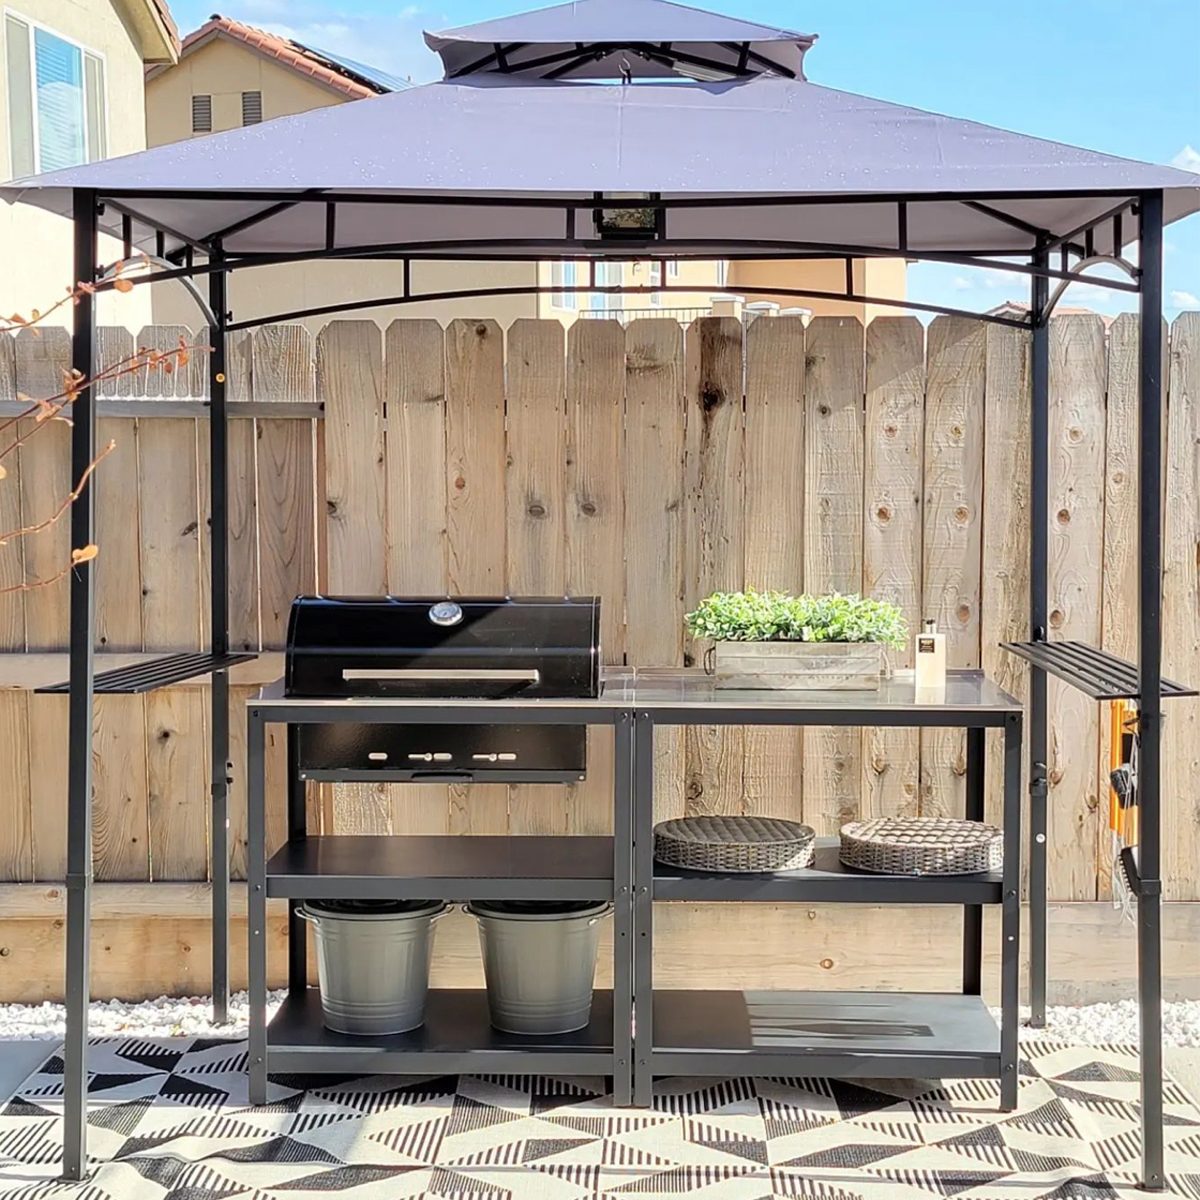 Affordable Built In Grill Courtesy @atidytouch Via Instagram